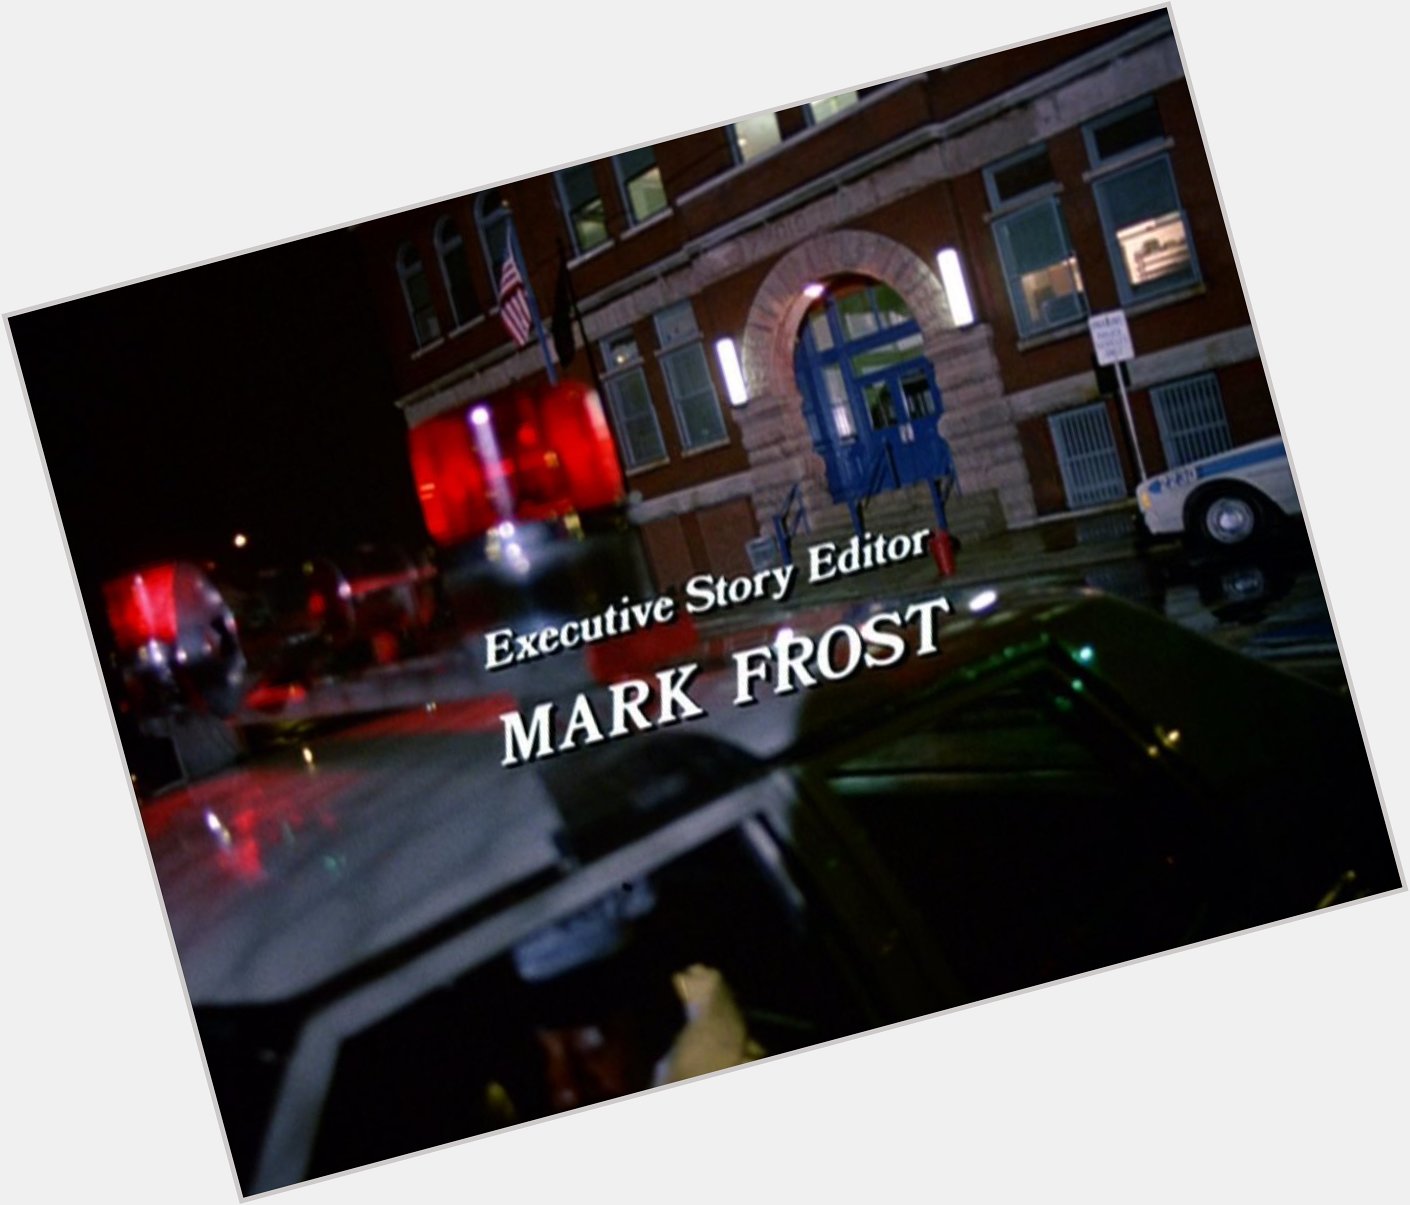 Happy Birthday to Sir Mark Frost! 